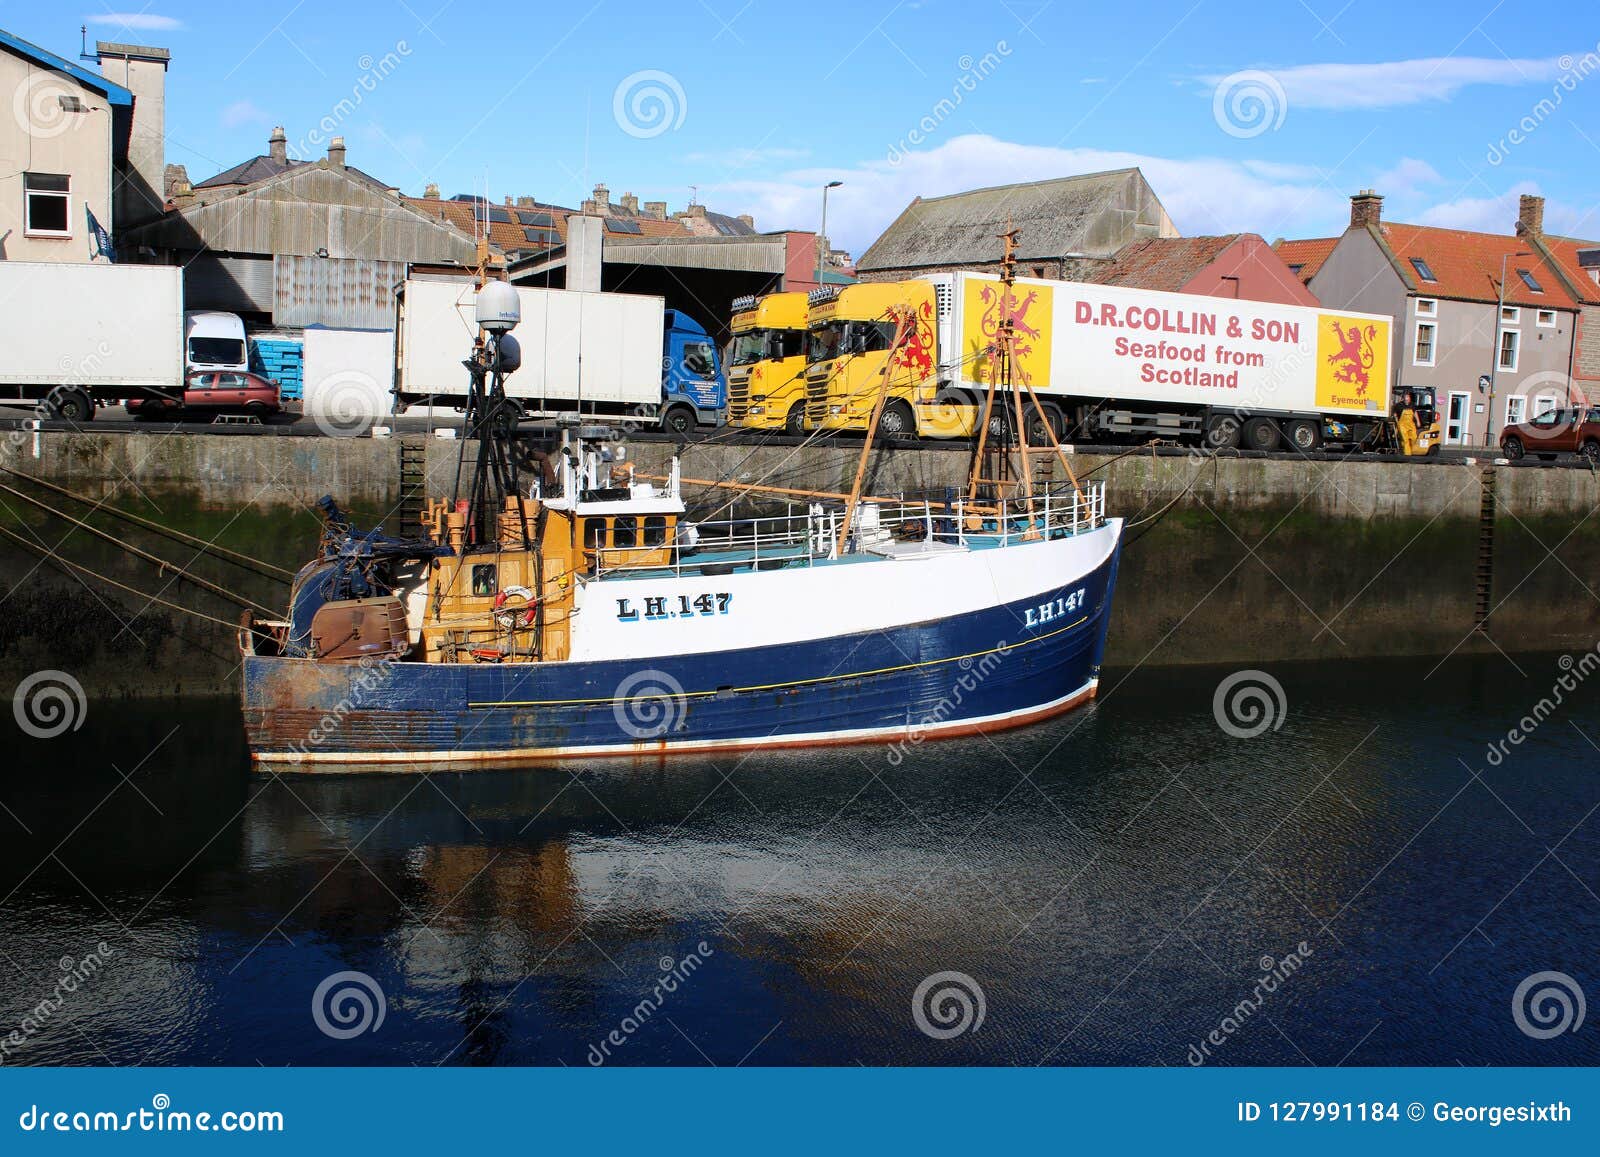 Fishing Boat and Seafood Lorry, Eyemouth Harbor Editorial Stock Image -  Image of ship, industry: 127991184